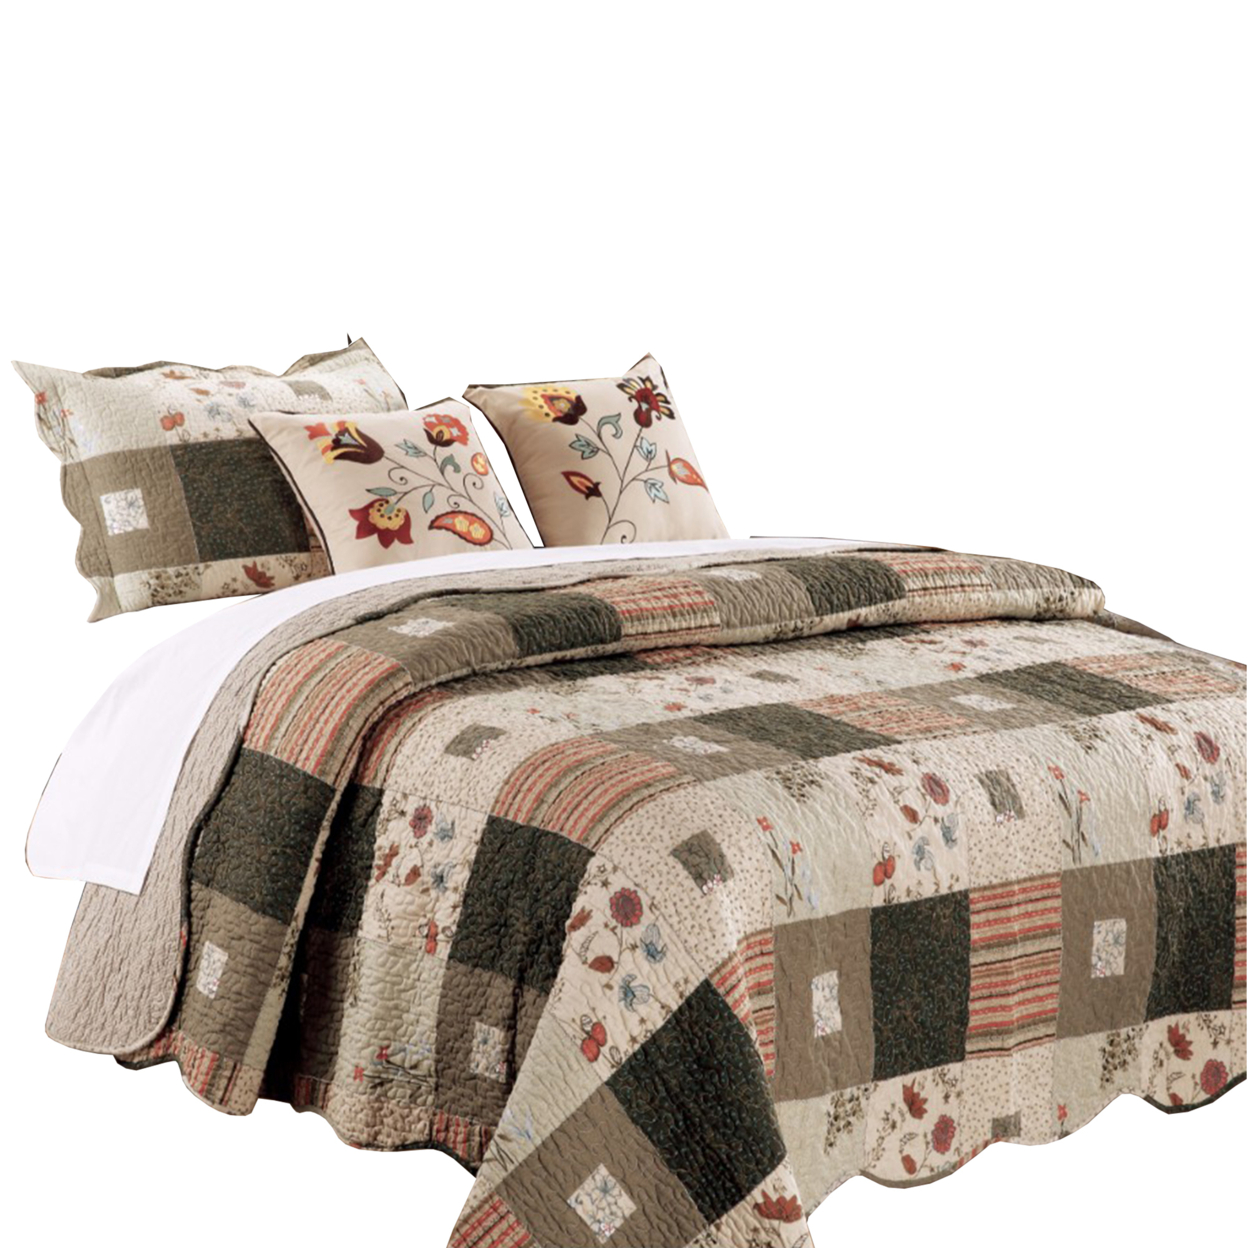 Douro Fabric 4 Piece Twin Quilt Set With Floral Print And Scalloped Edges,Brown- Saltoro Sherpi